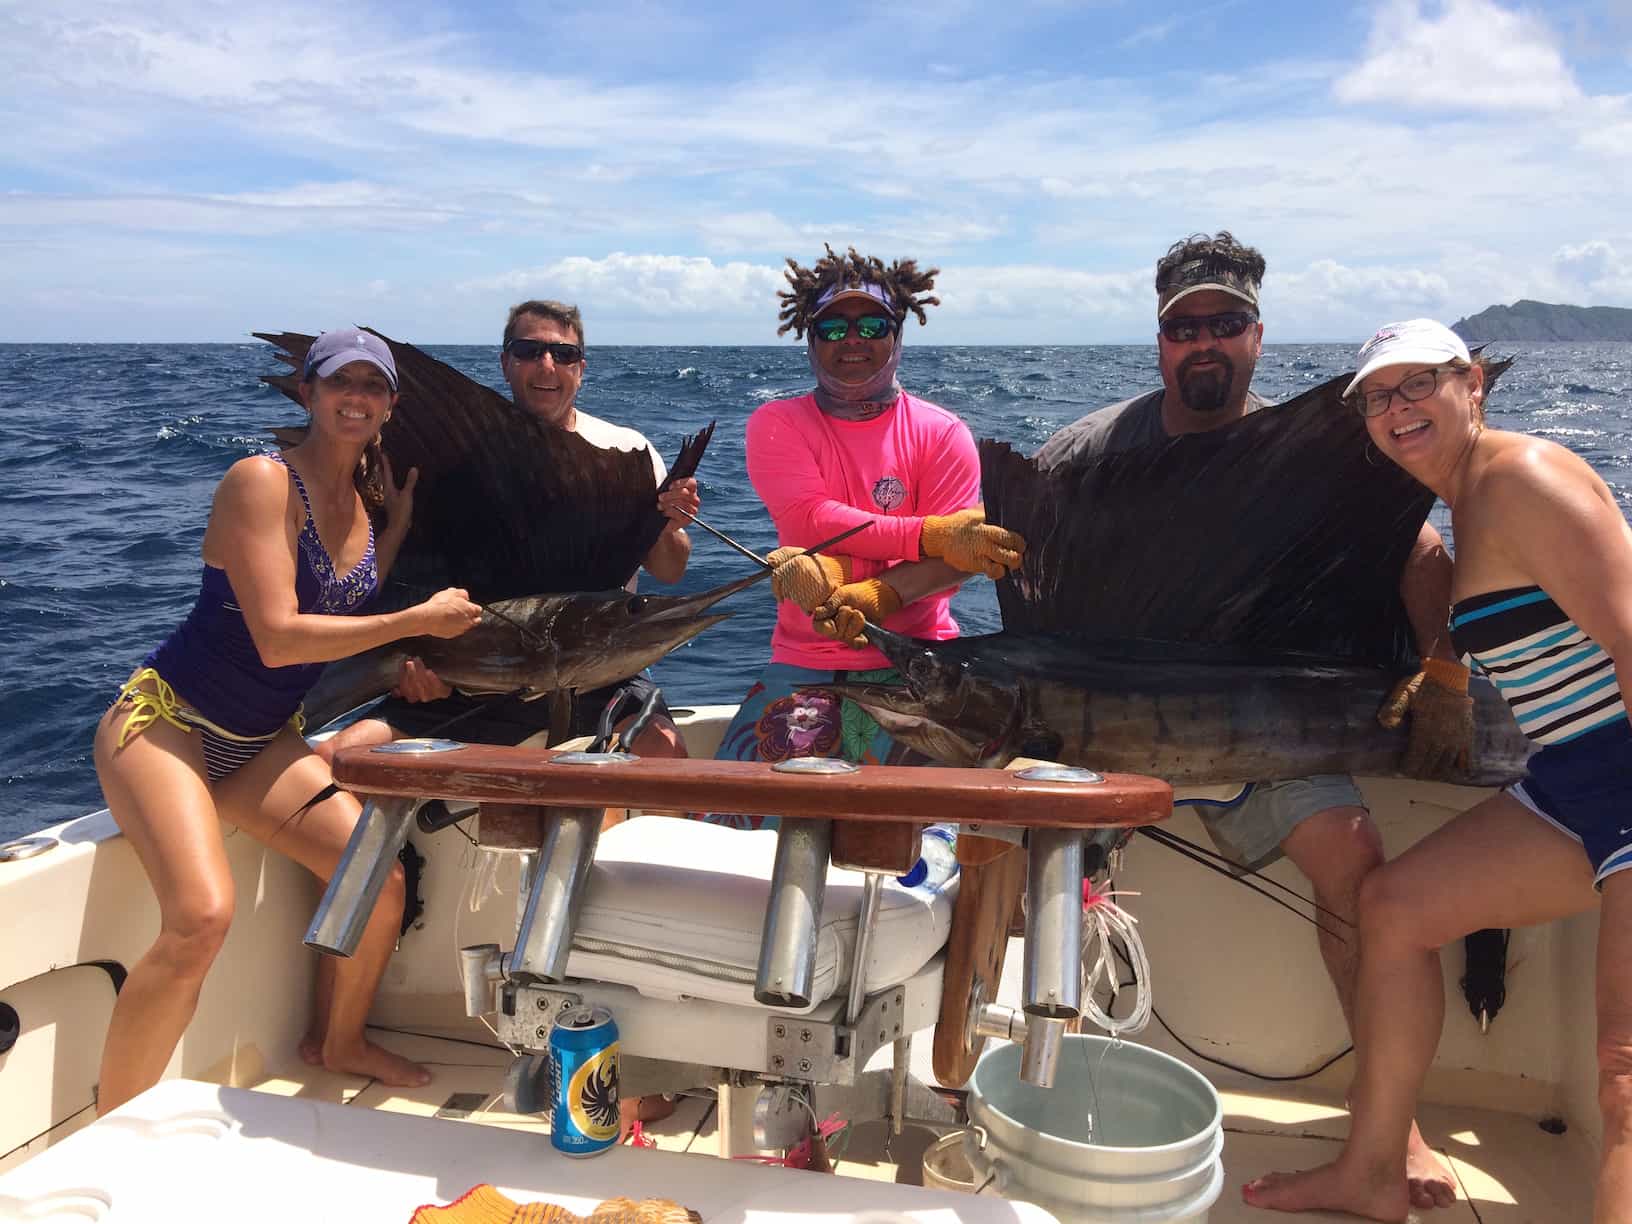 Two sailfish hooked at the same time on our Costa Rica Fishing Charter.